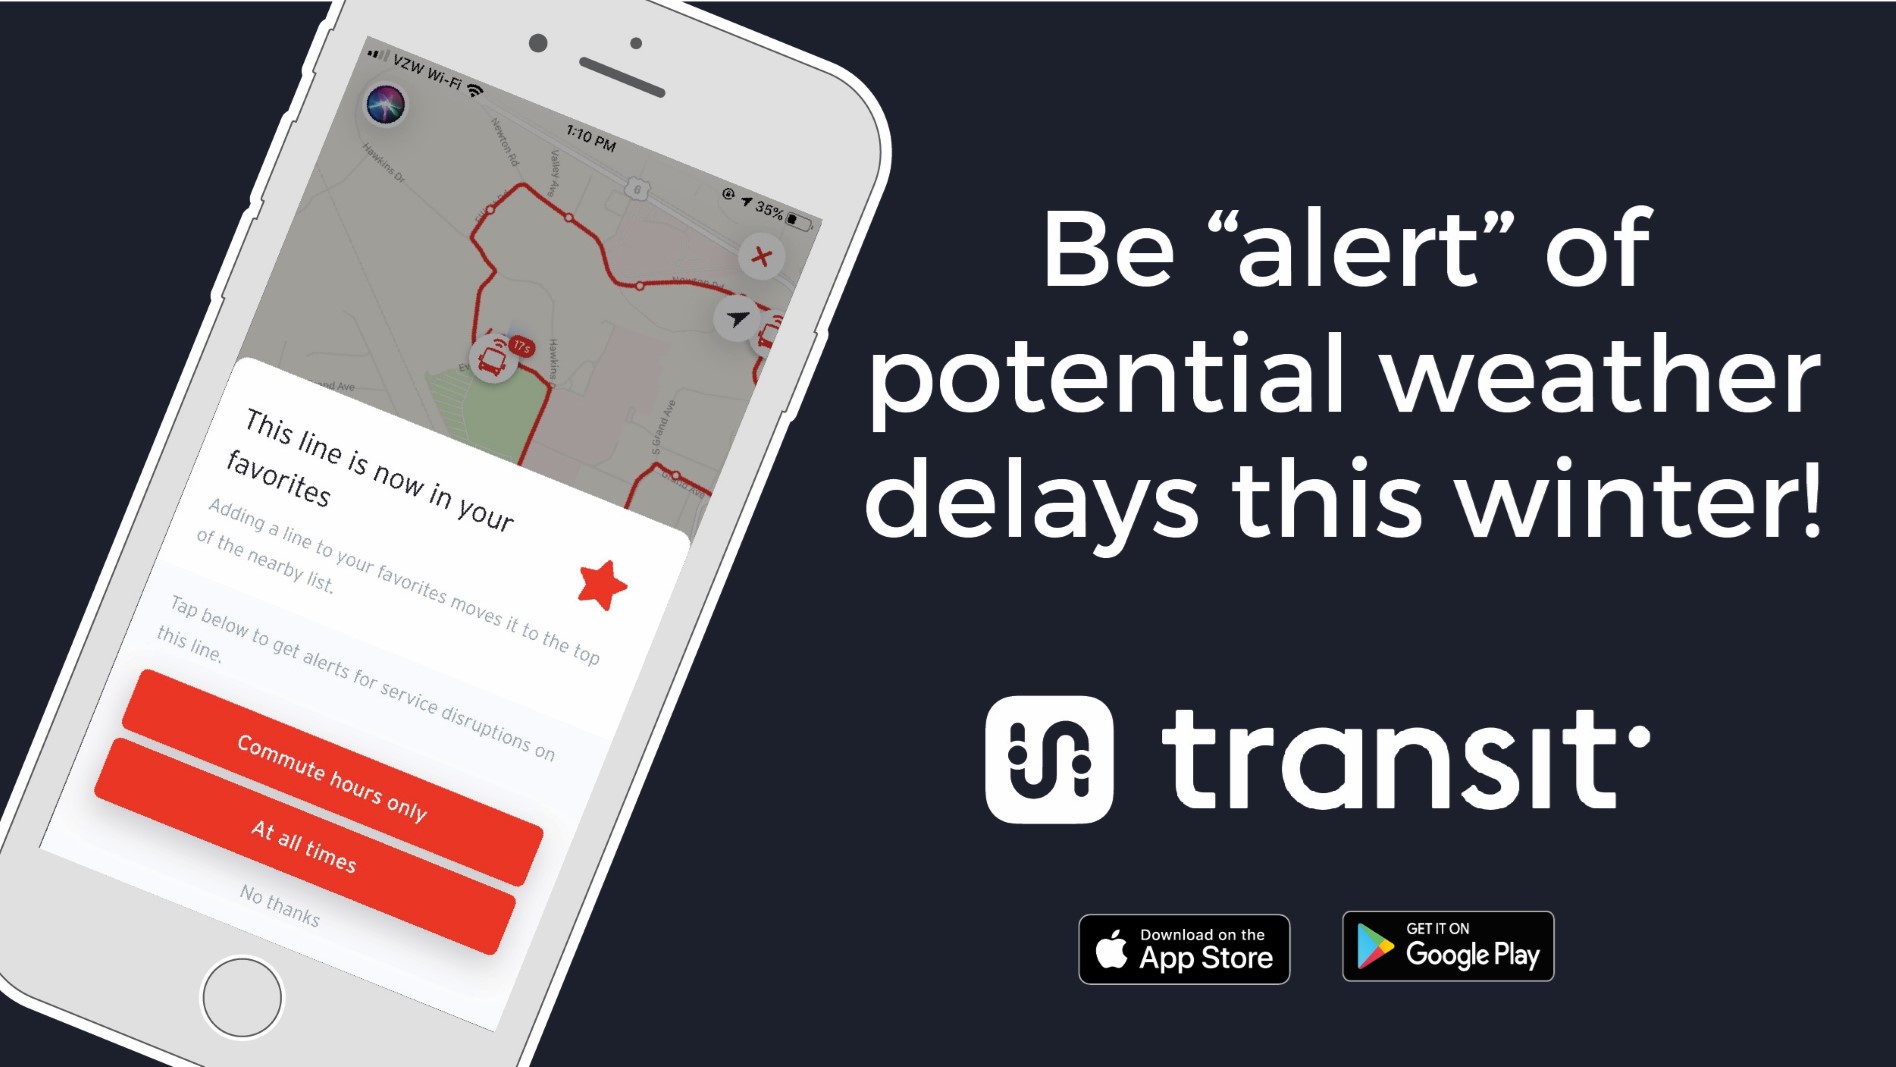 Use Transit app to see weather delays